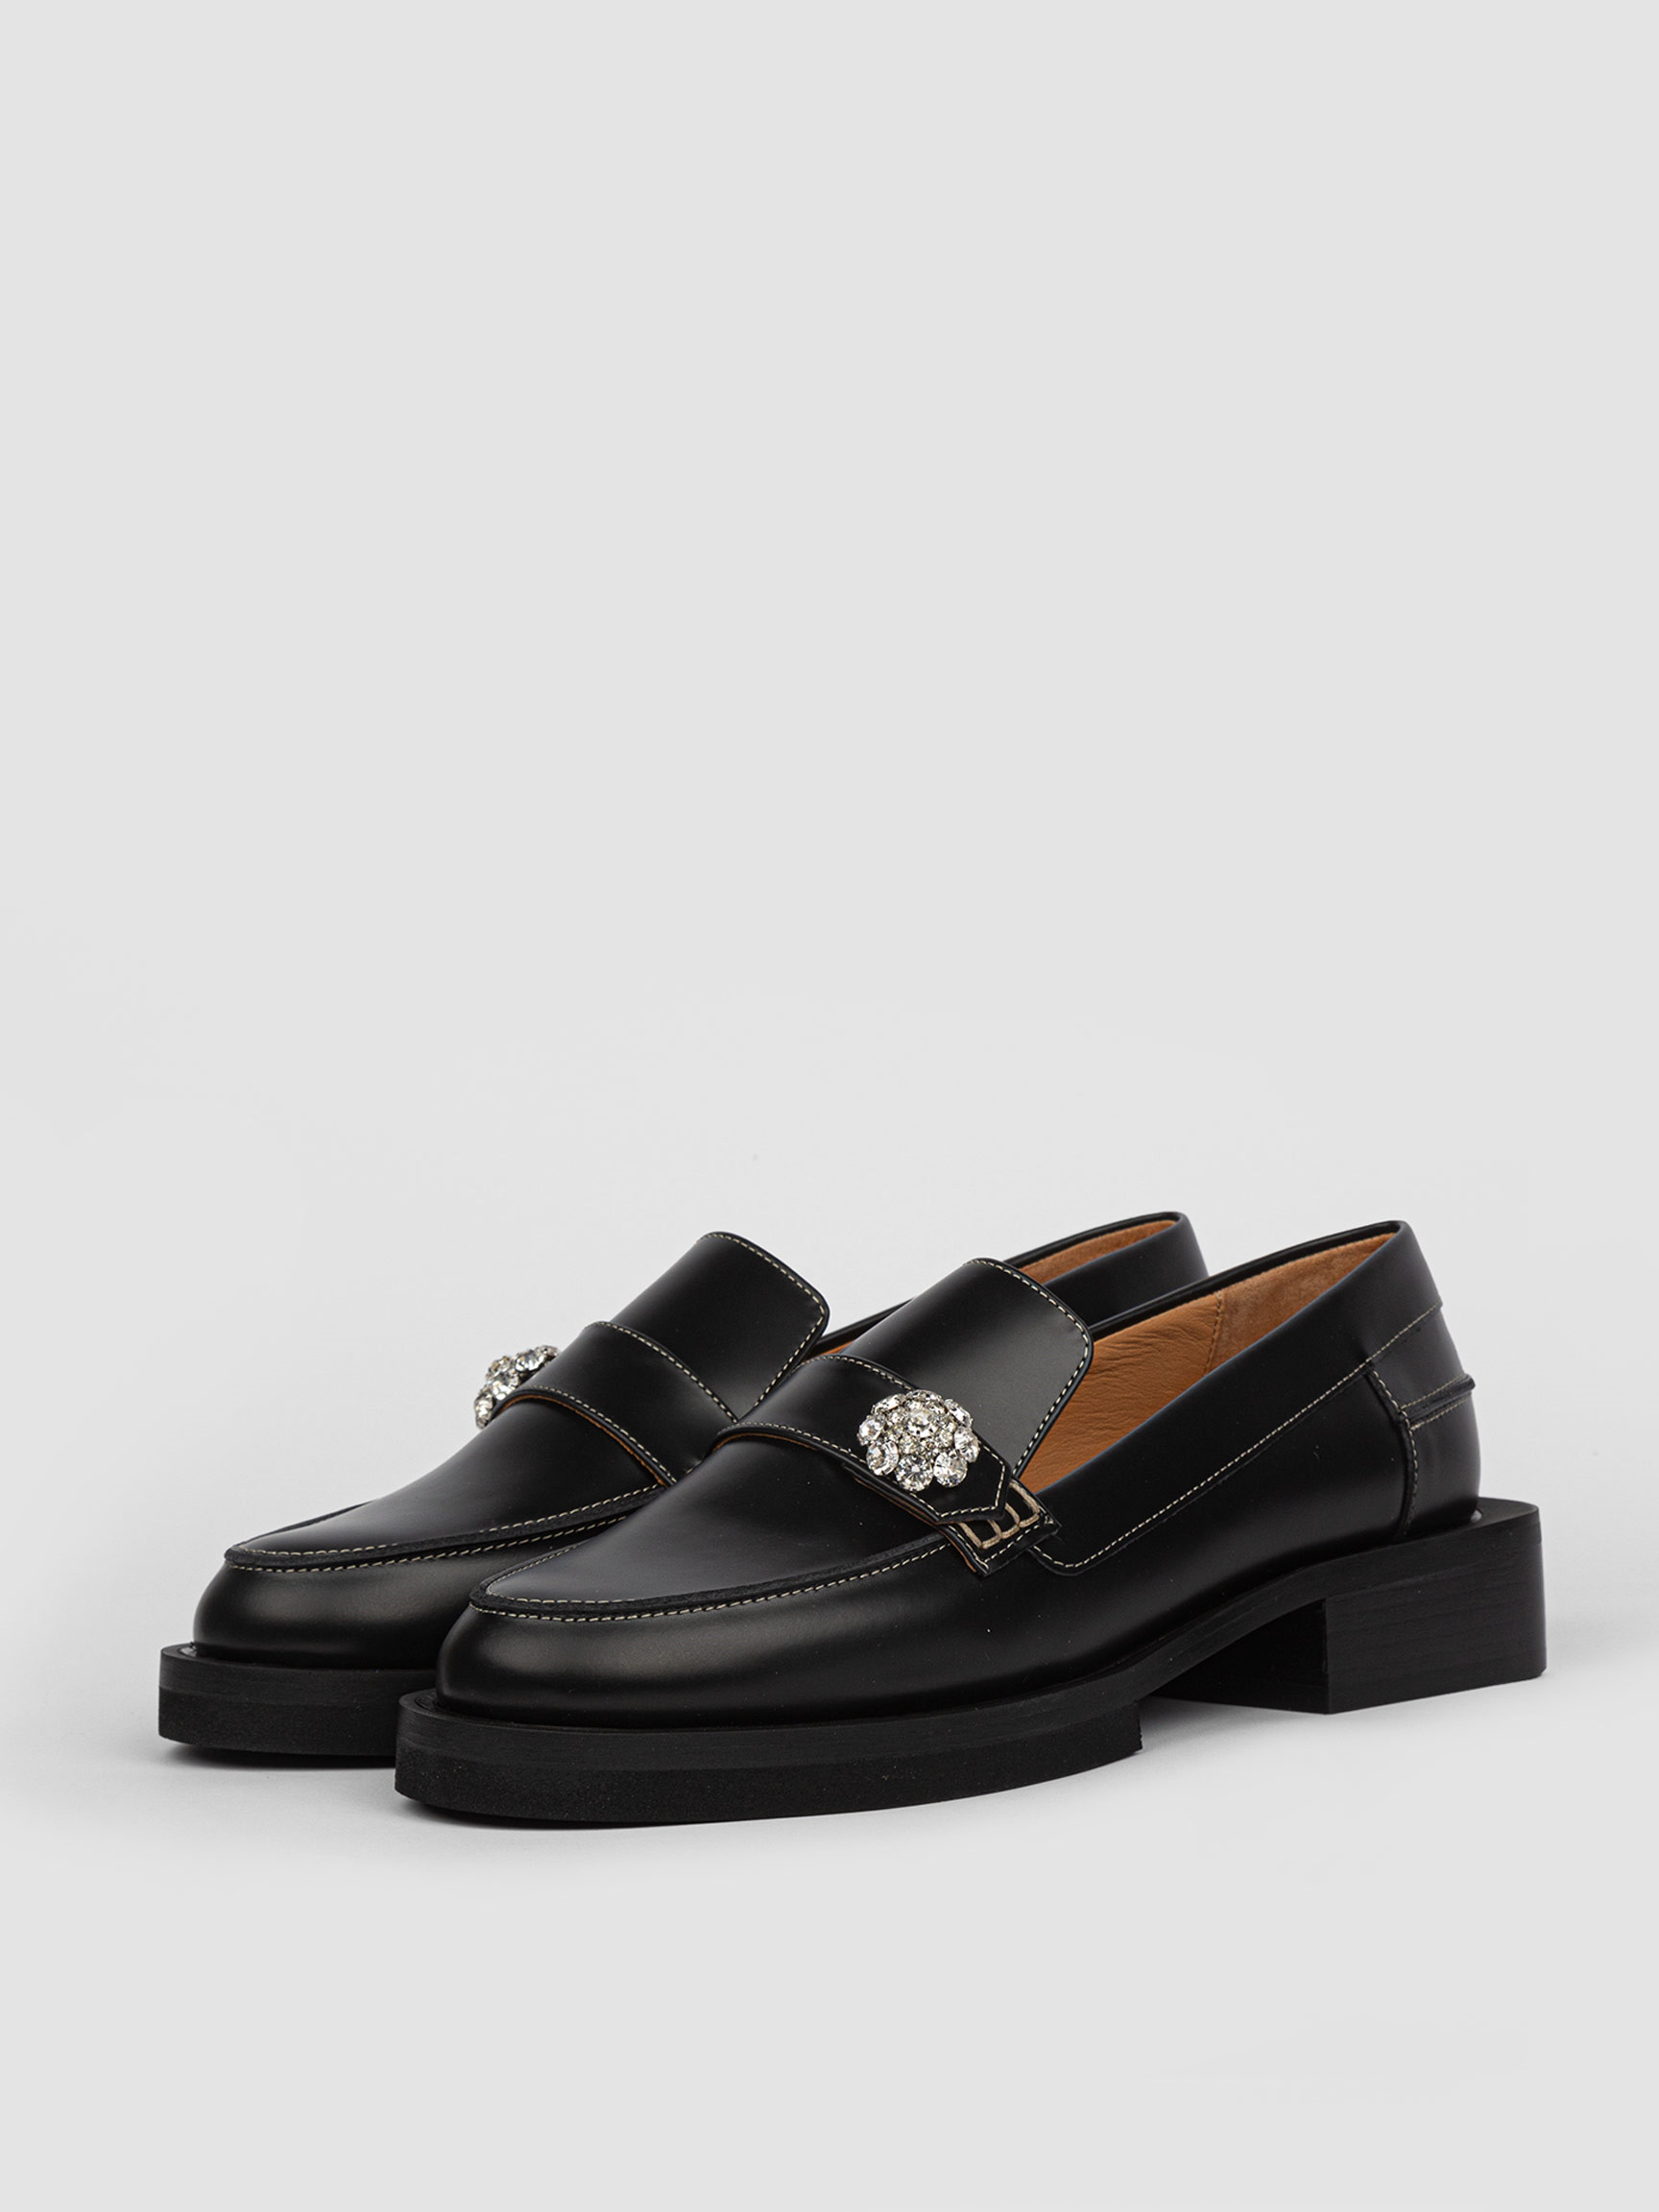 GANNI | SHOES | BALLET FLATS AND LOAFERS